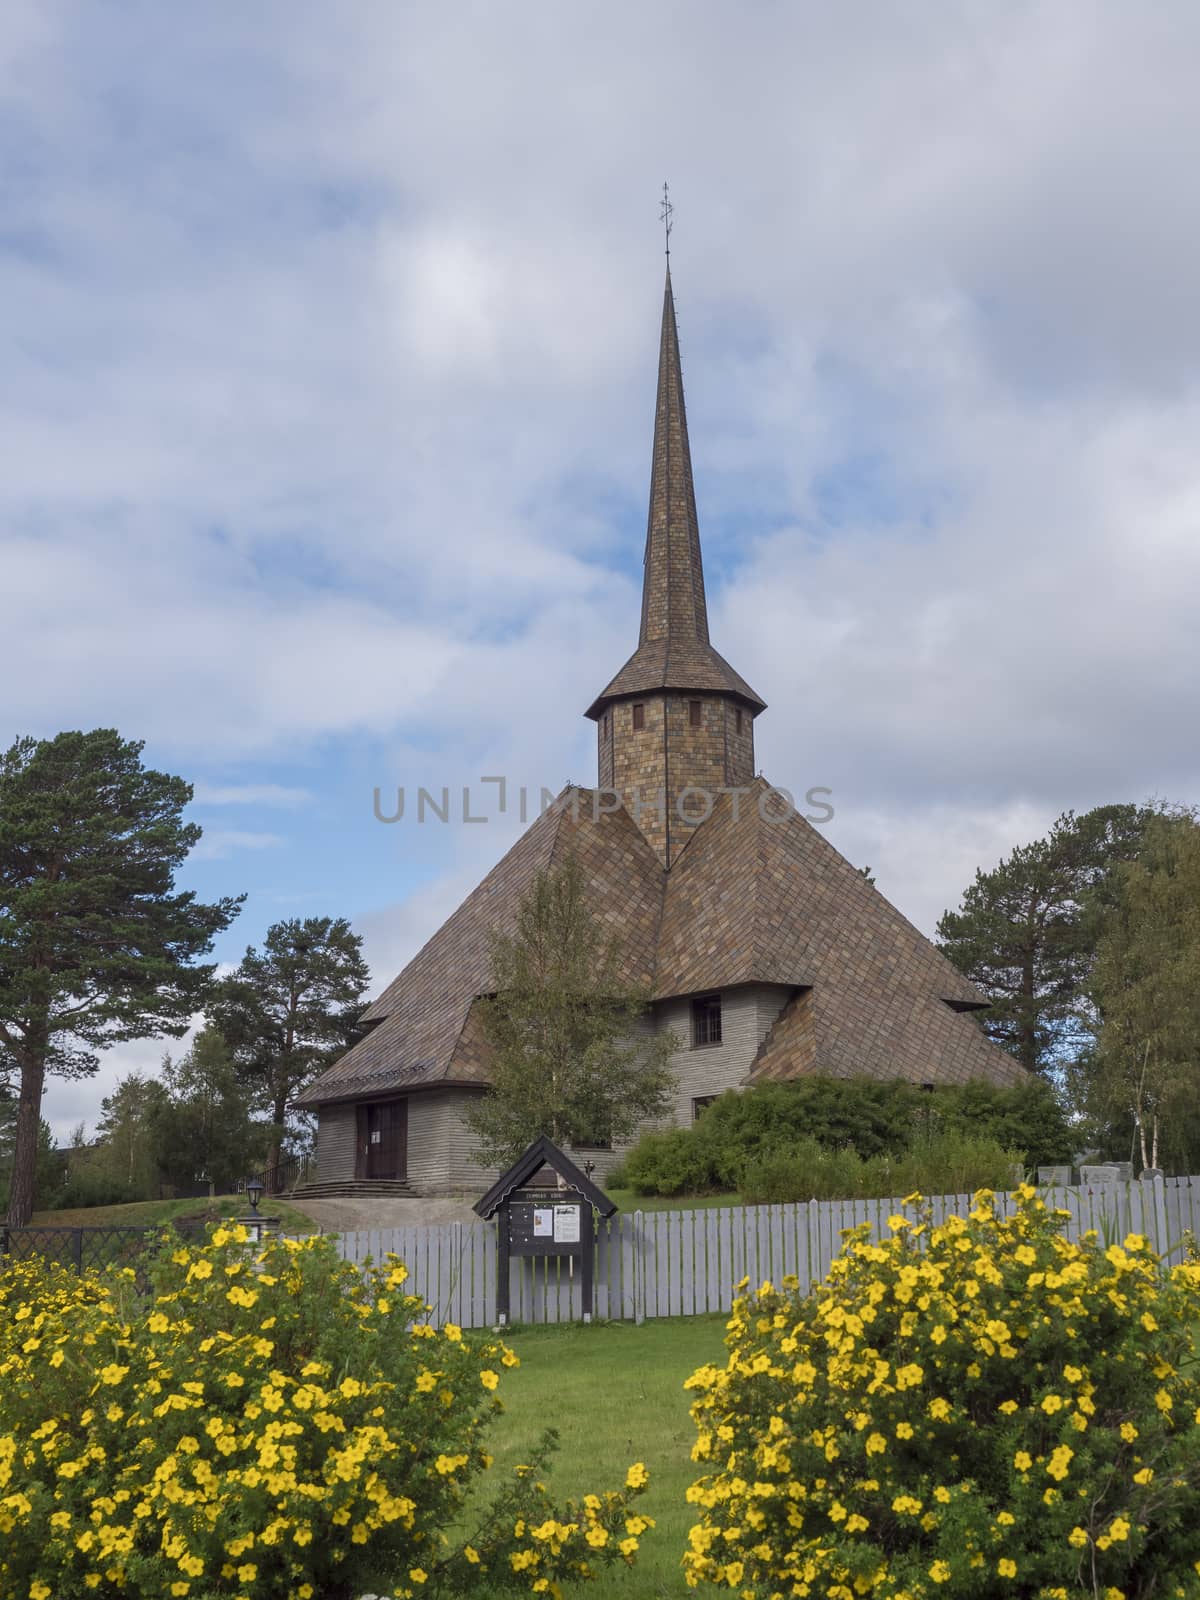 The old church of Dombas in traditional style with blooming yellow flowers. Blue sky, white cloud background. Oppland, Norway by Henkeova